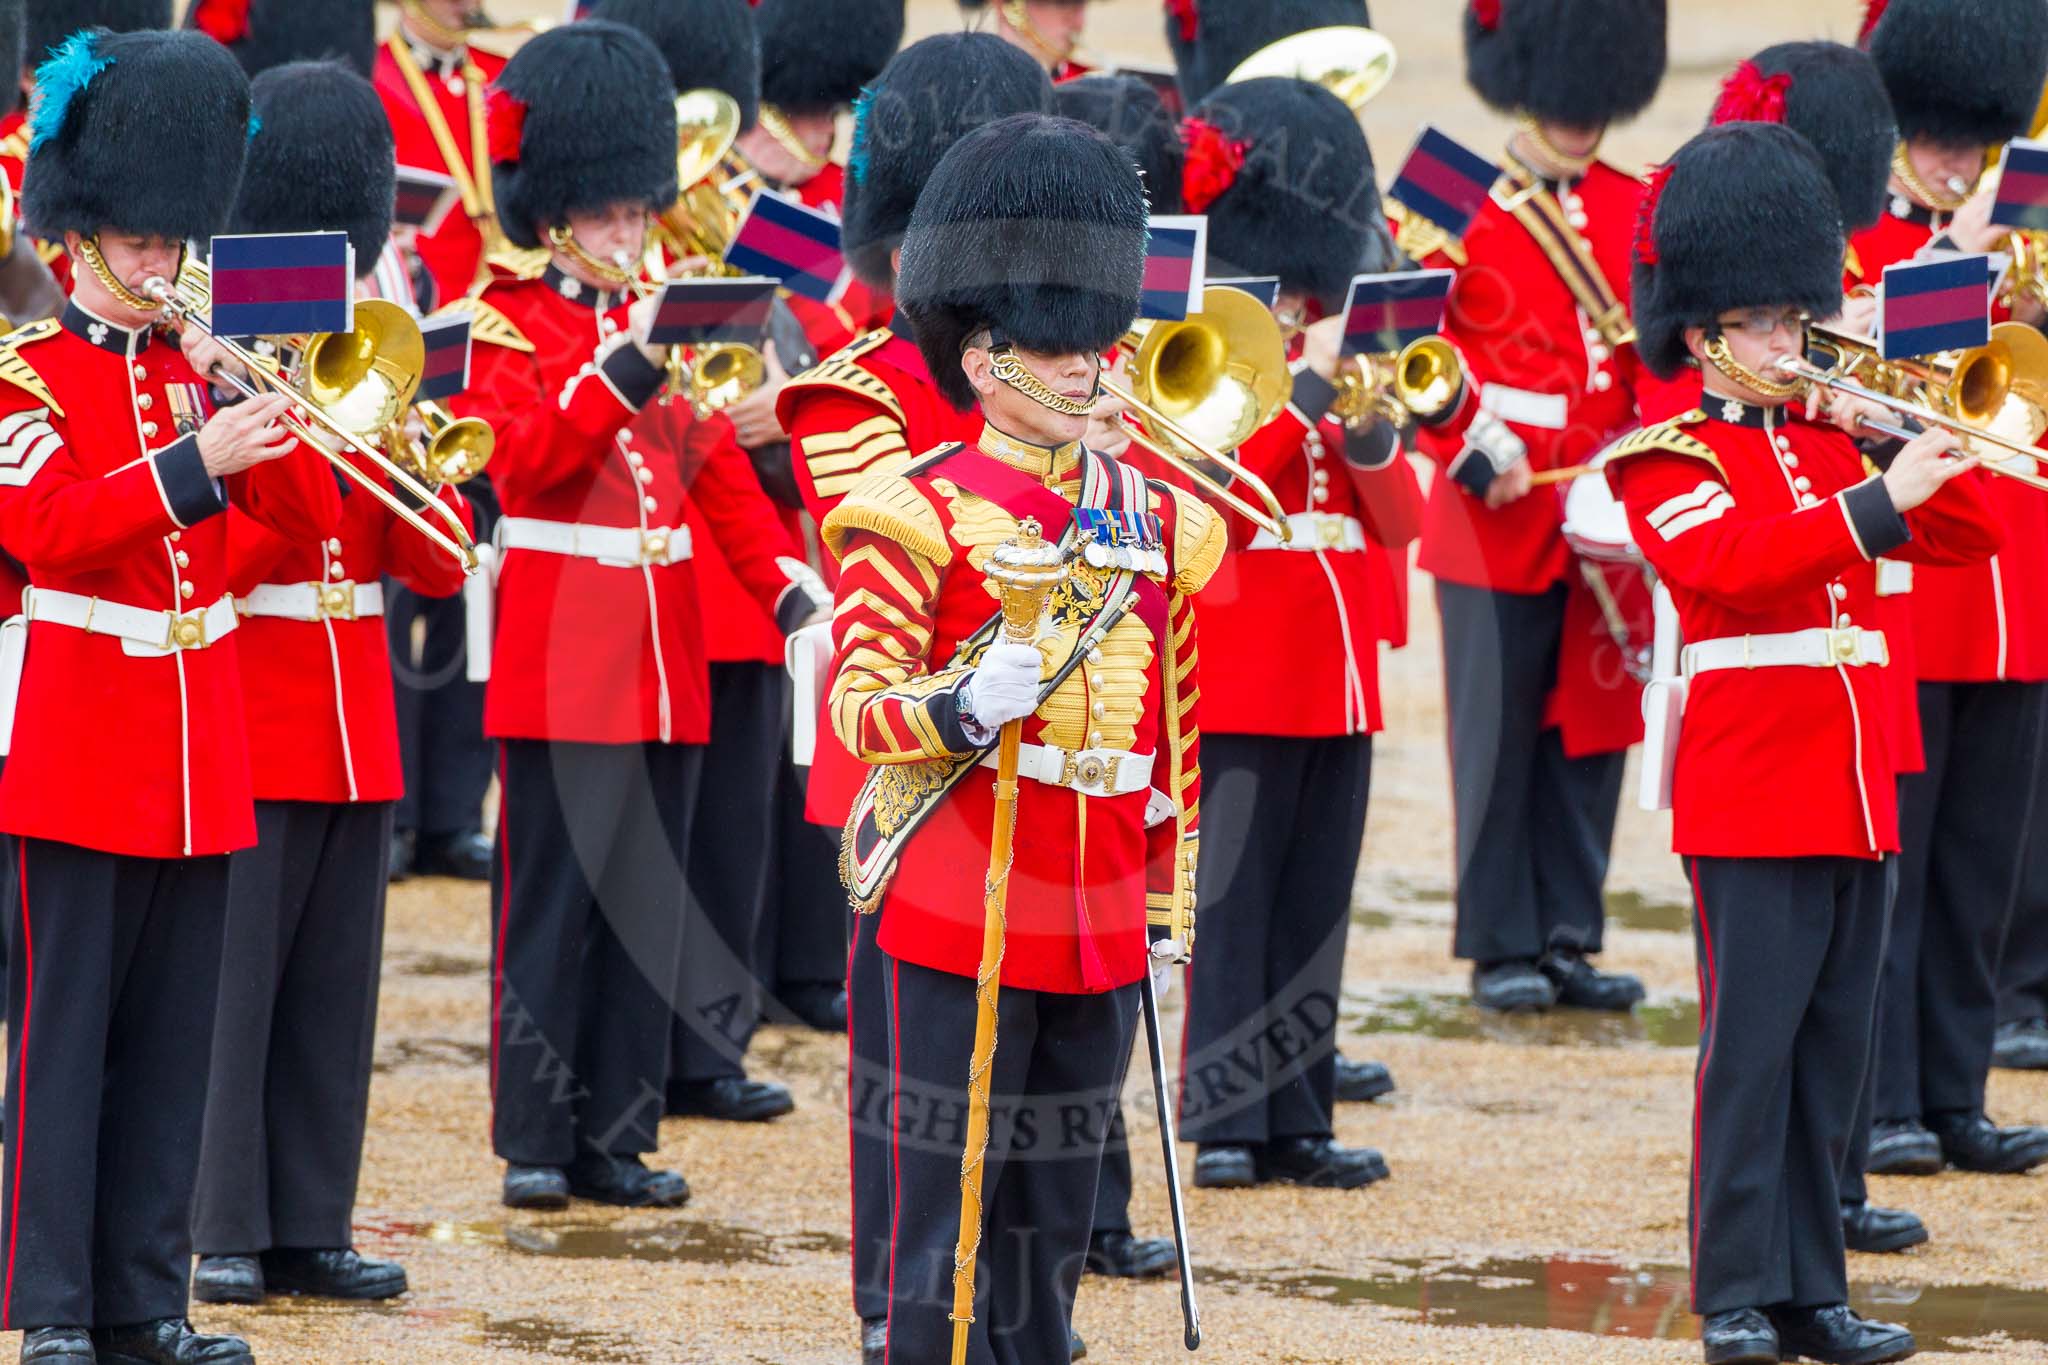 The Colonel's Review 2014.
Horse Guards Parade, Westminster,
London,

United Kingdom,
on 07 June 2014 at 11:38, image #529